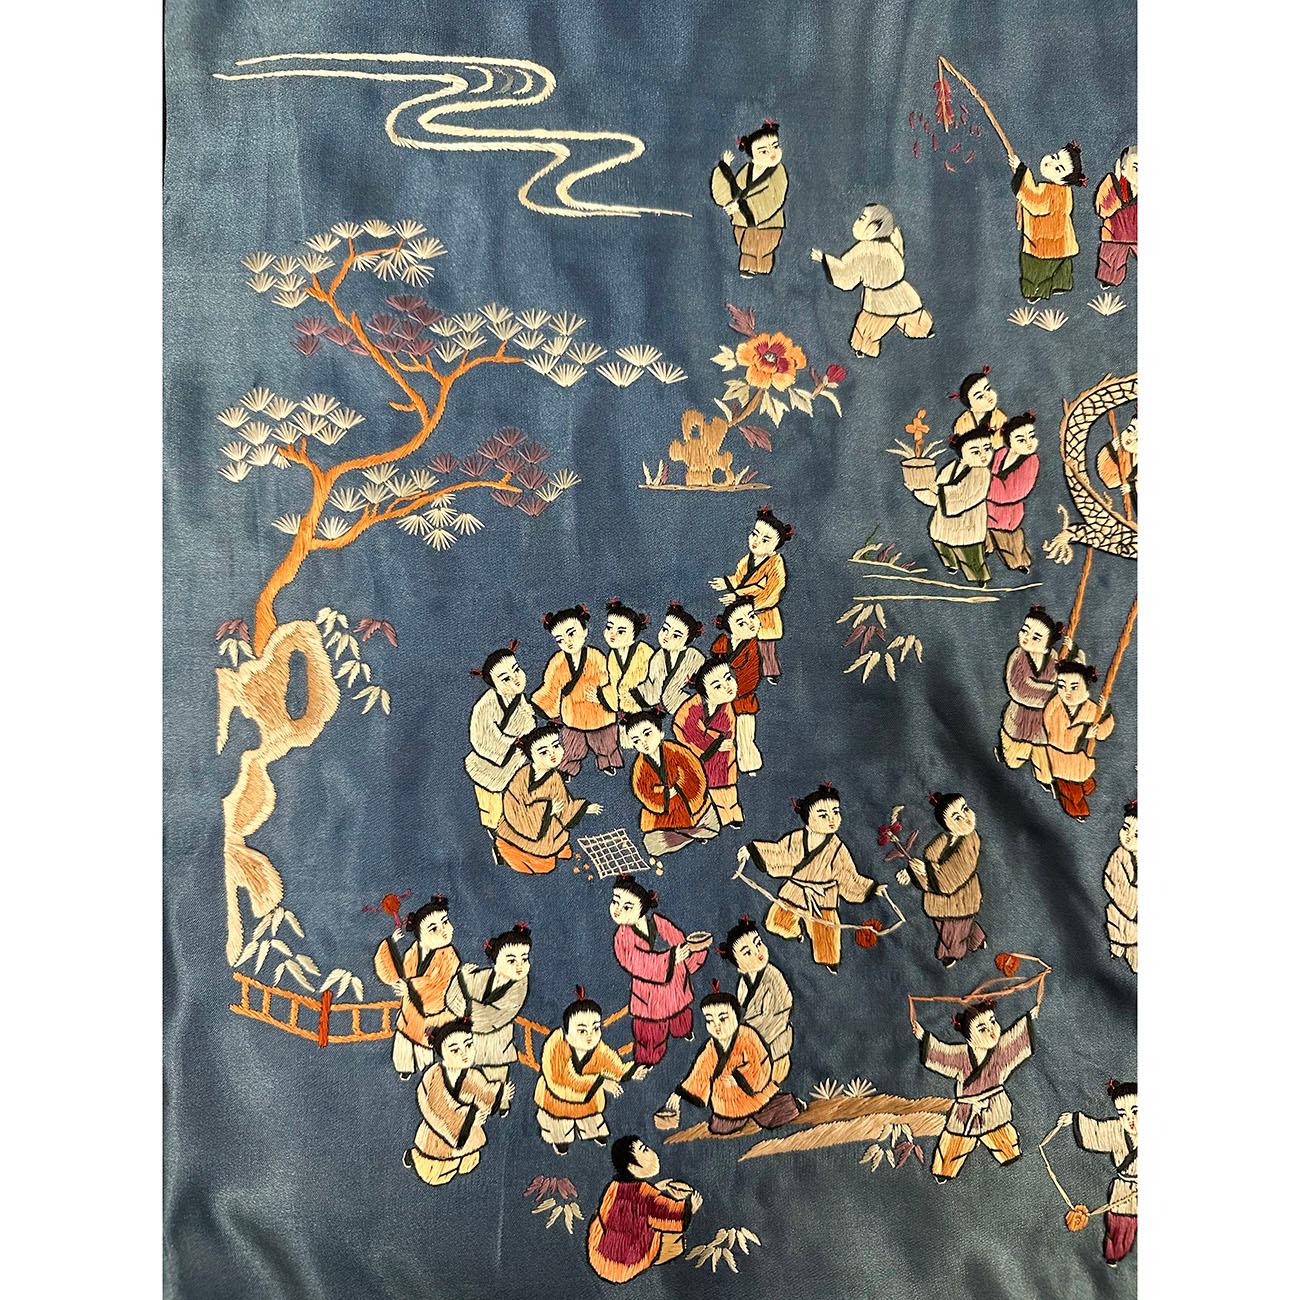 This silk embroidery of Baizi (Hundreds of Children) playing in Spring is hand stitched on the silk fabric. The allusion of Baizi first came from the 